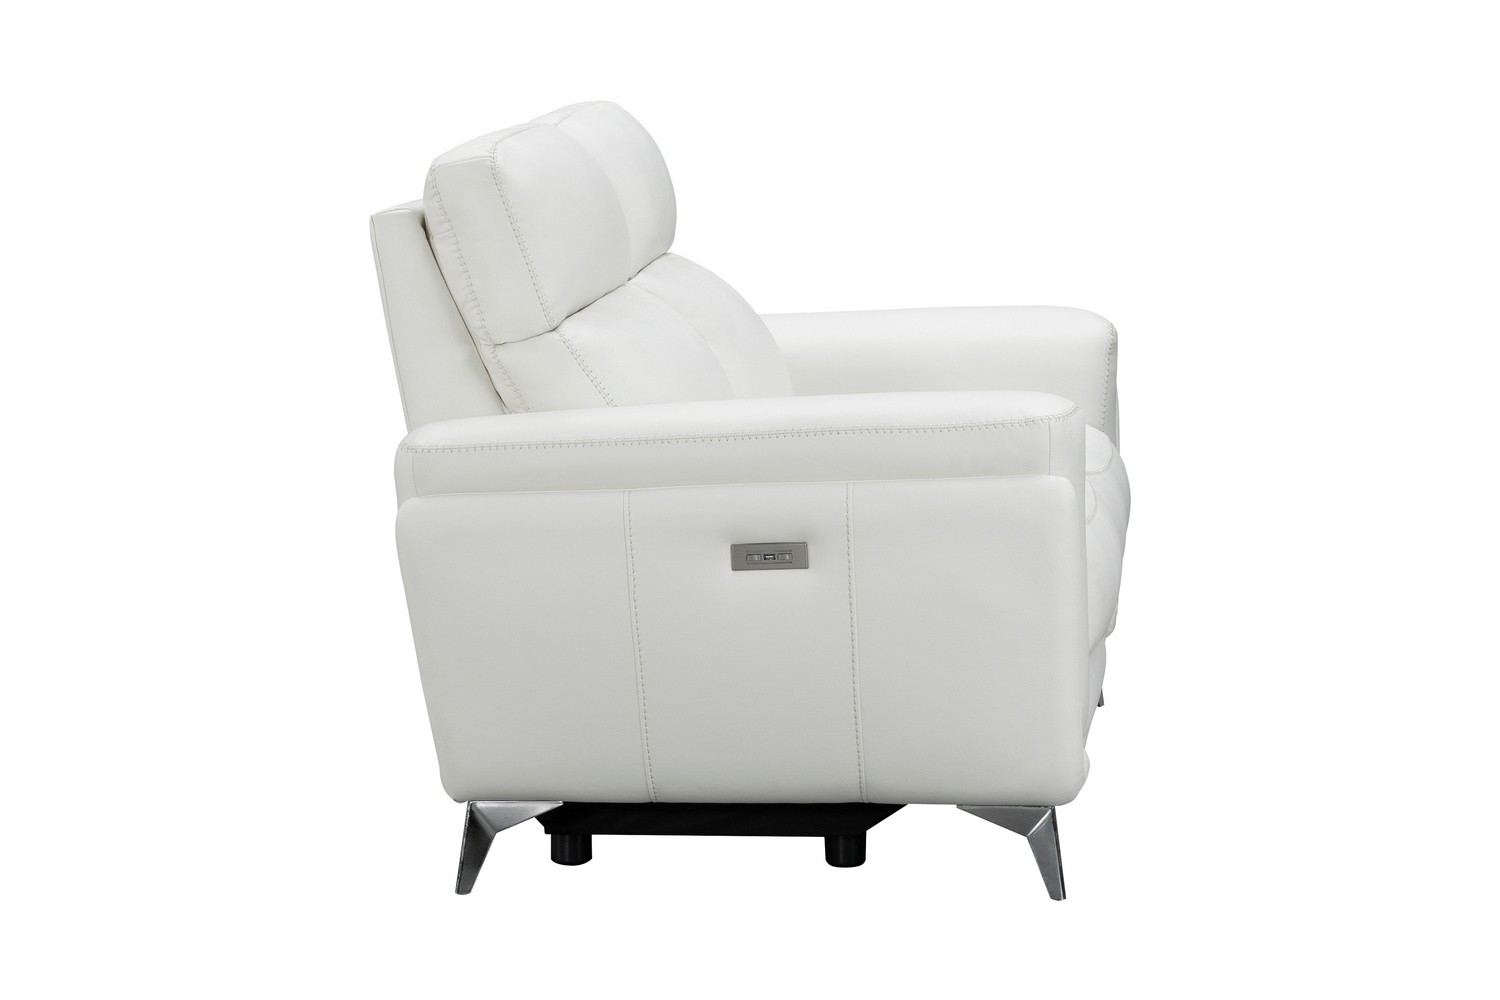 Barcalounger Cameron Power Reclining Loveseat with Power Head Rests - Enzo Winter White/Leather Match